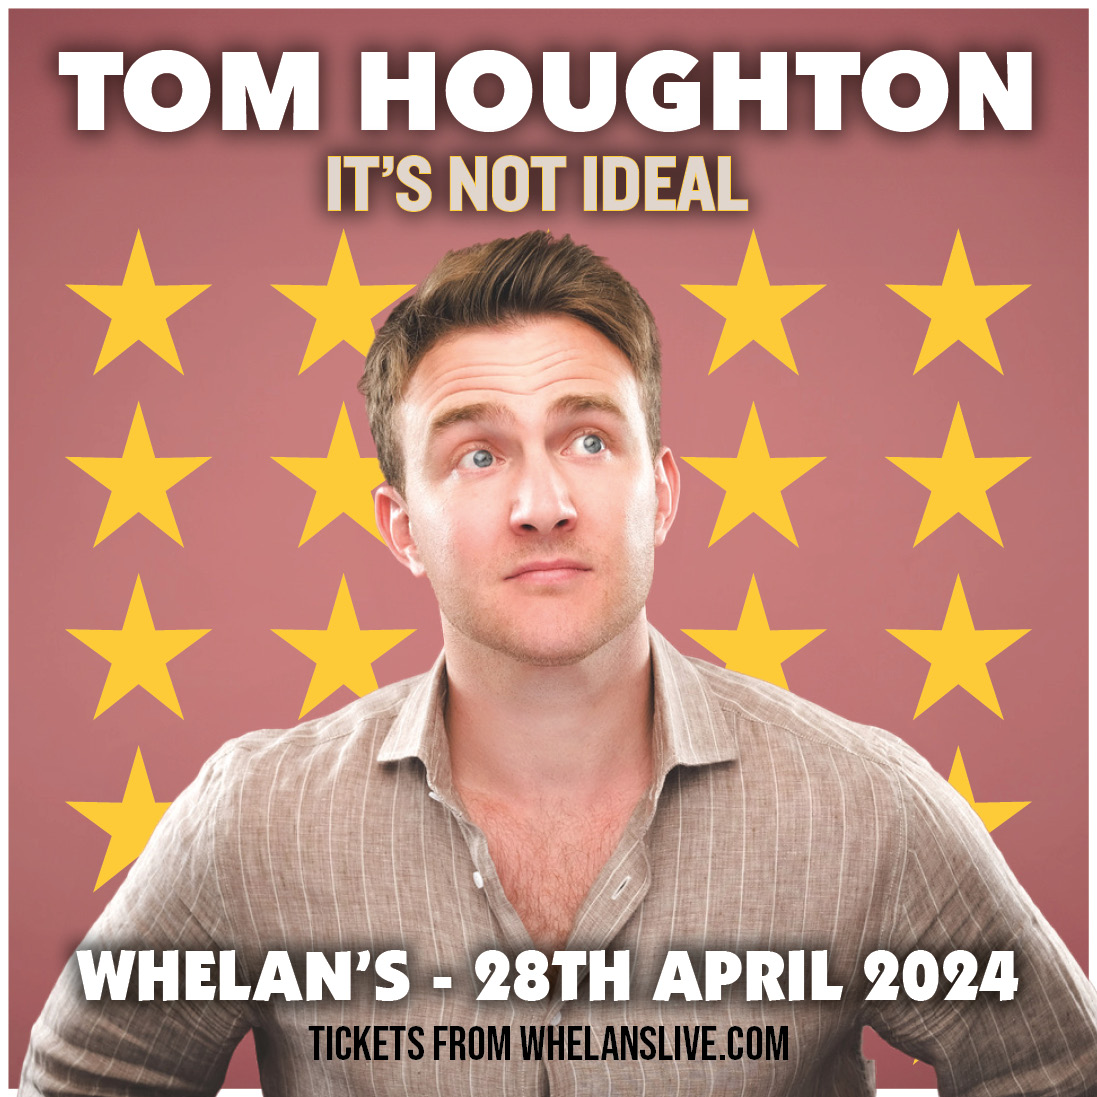 THIS SUNDAY: TOM HOUGHTON Whelan’s, Dublin • 28th April Social media sensation, star of Netflix “The Circle” & host of “Very British Problems: Live” & “Bad Manors” podcast, Tom Houghton sets out on his biggest & most hilarious show yet. whelanslive.com/event/tom-houg… @HonourableTom